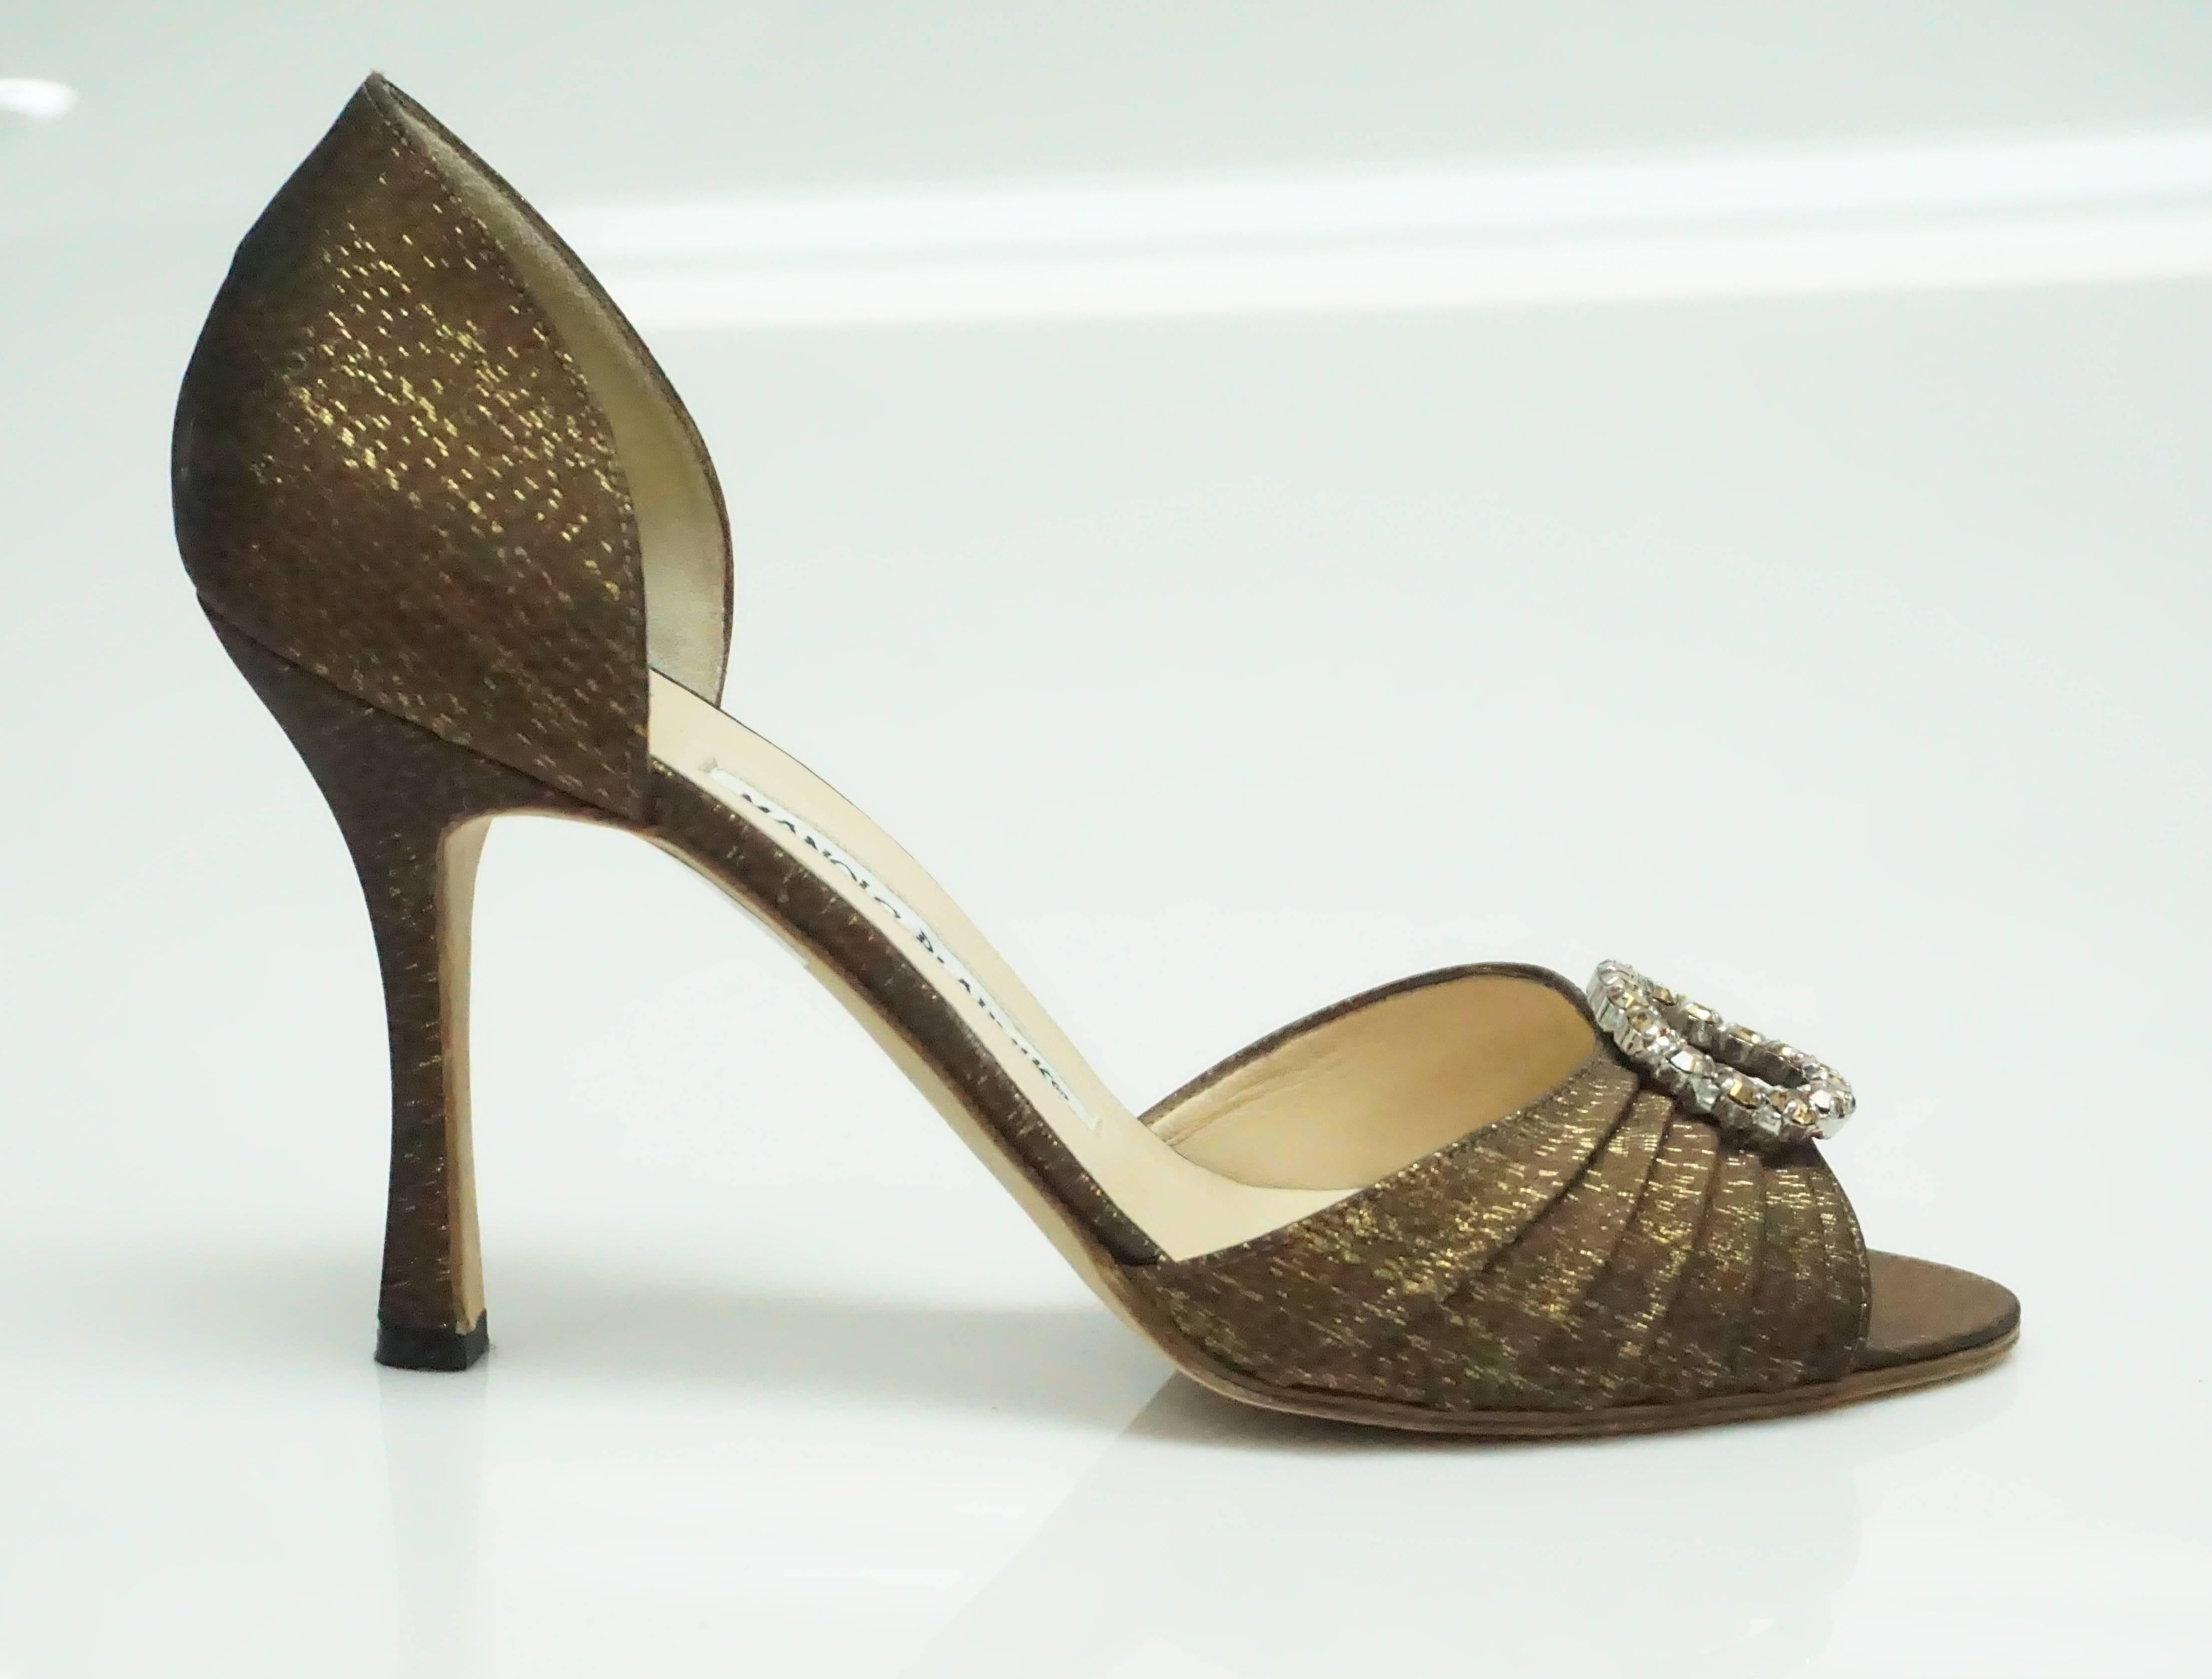 Manolo Blahnik Bronze Silk D'Orsay with Rhinestones - 38   These classic shoes are in excellent condition. They appear as if they have never been worn. The shoe has a peep toe and it embellished with a beautiful rhinestone  clasp. The shoe is made